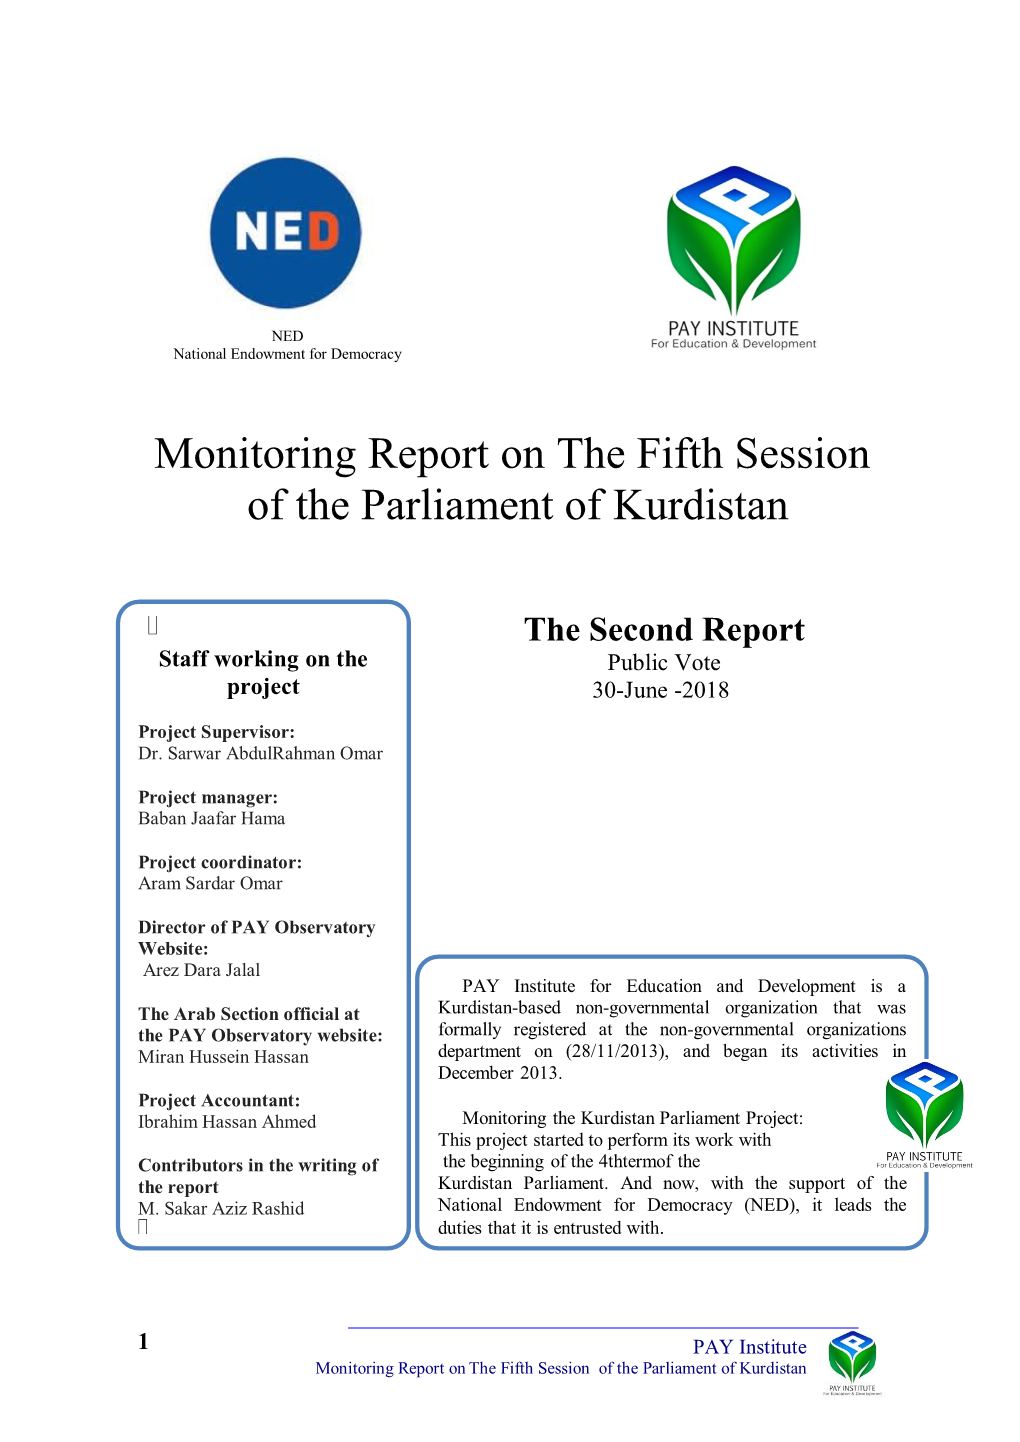 Monitoring Report on the Fifth Session of the Parliament of Kurdistan